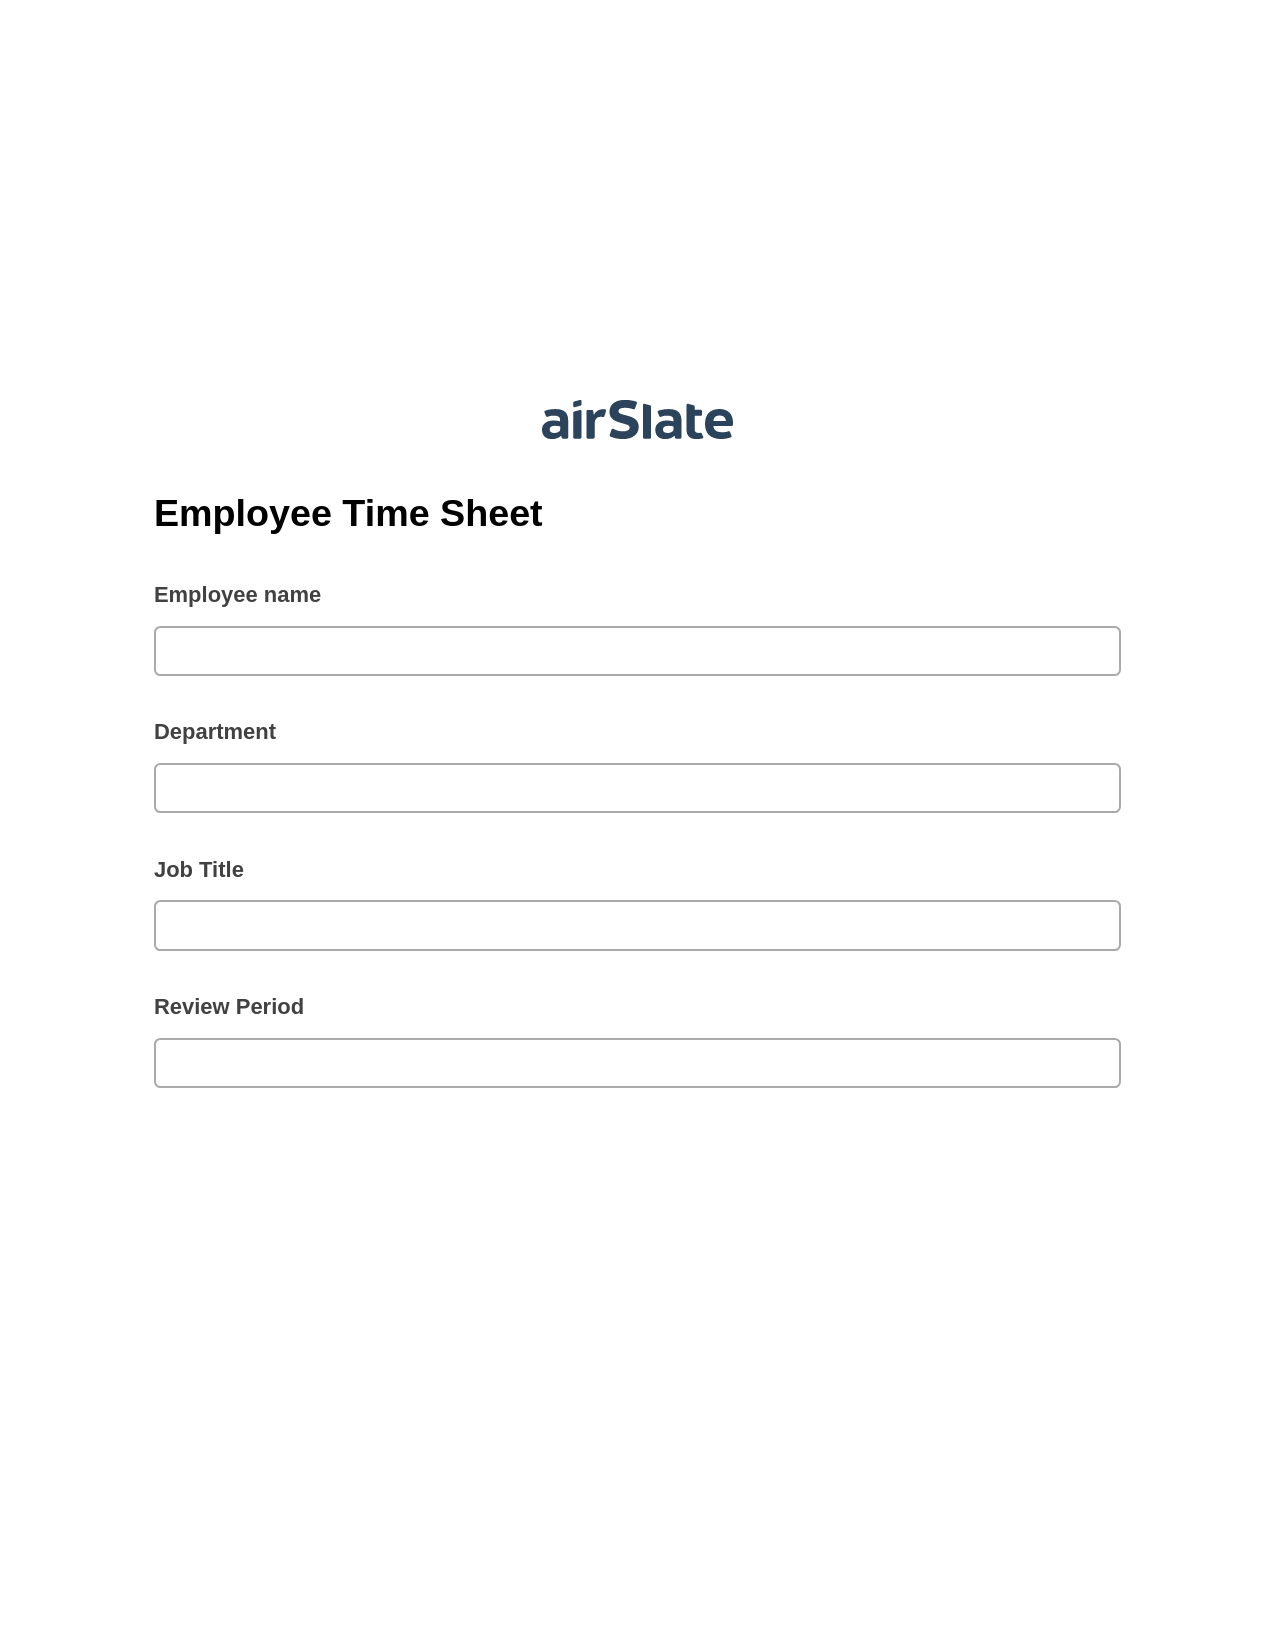 Employee Time Sheet Pre-fill from Excel Spreadsheet Bot, System Bot - Create a Slate in another Flow, Export to WebMerge Bot